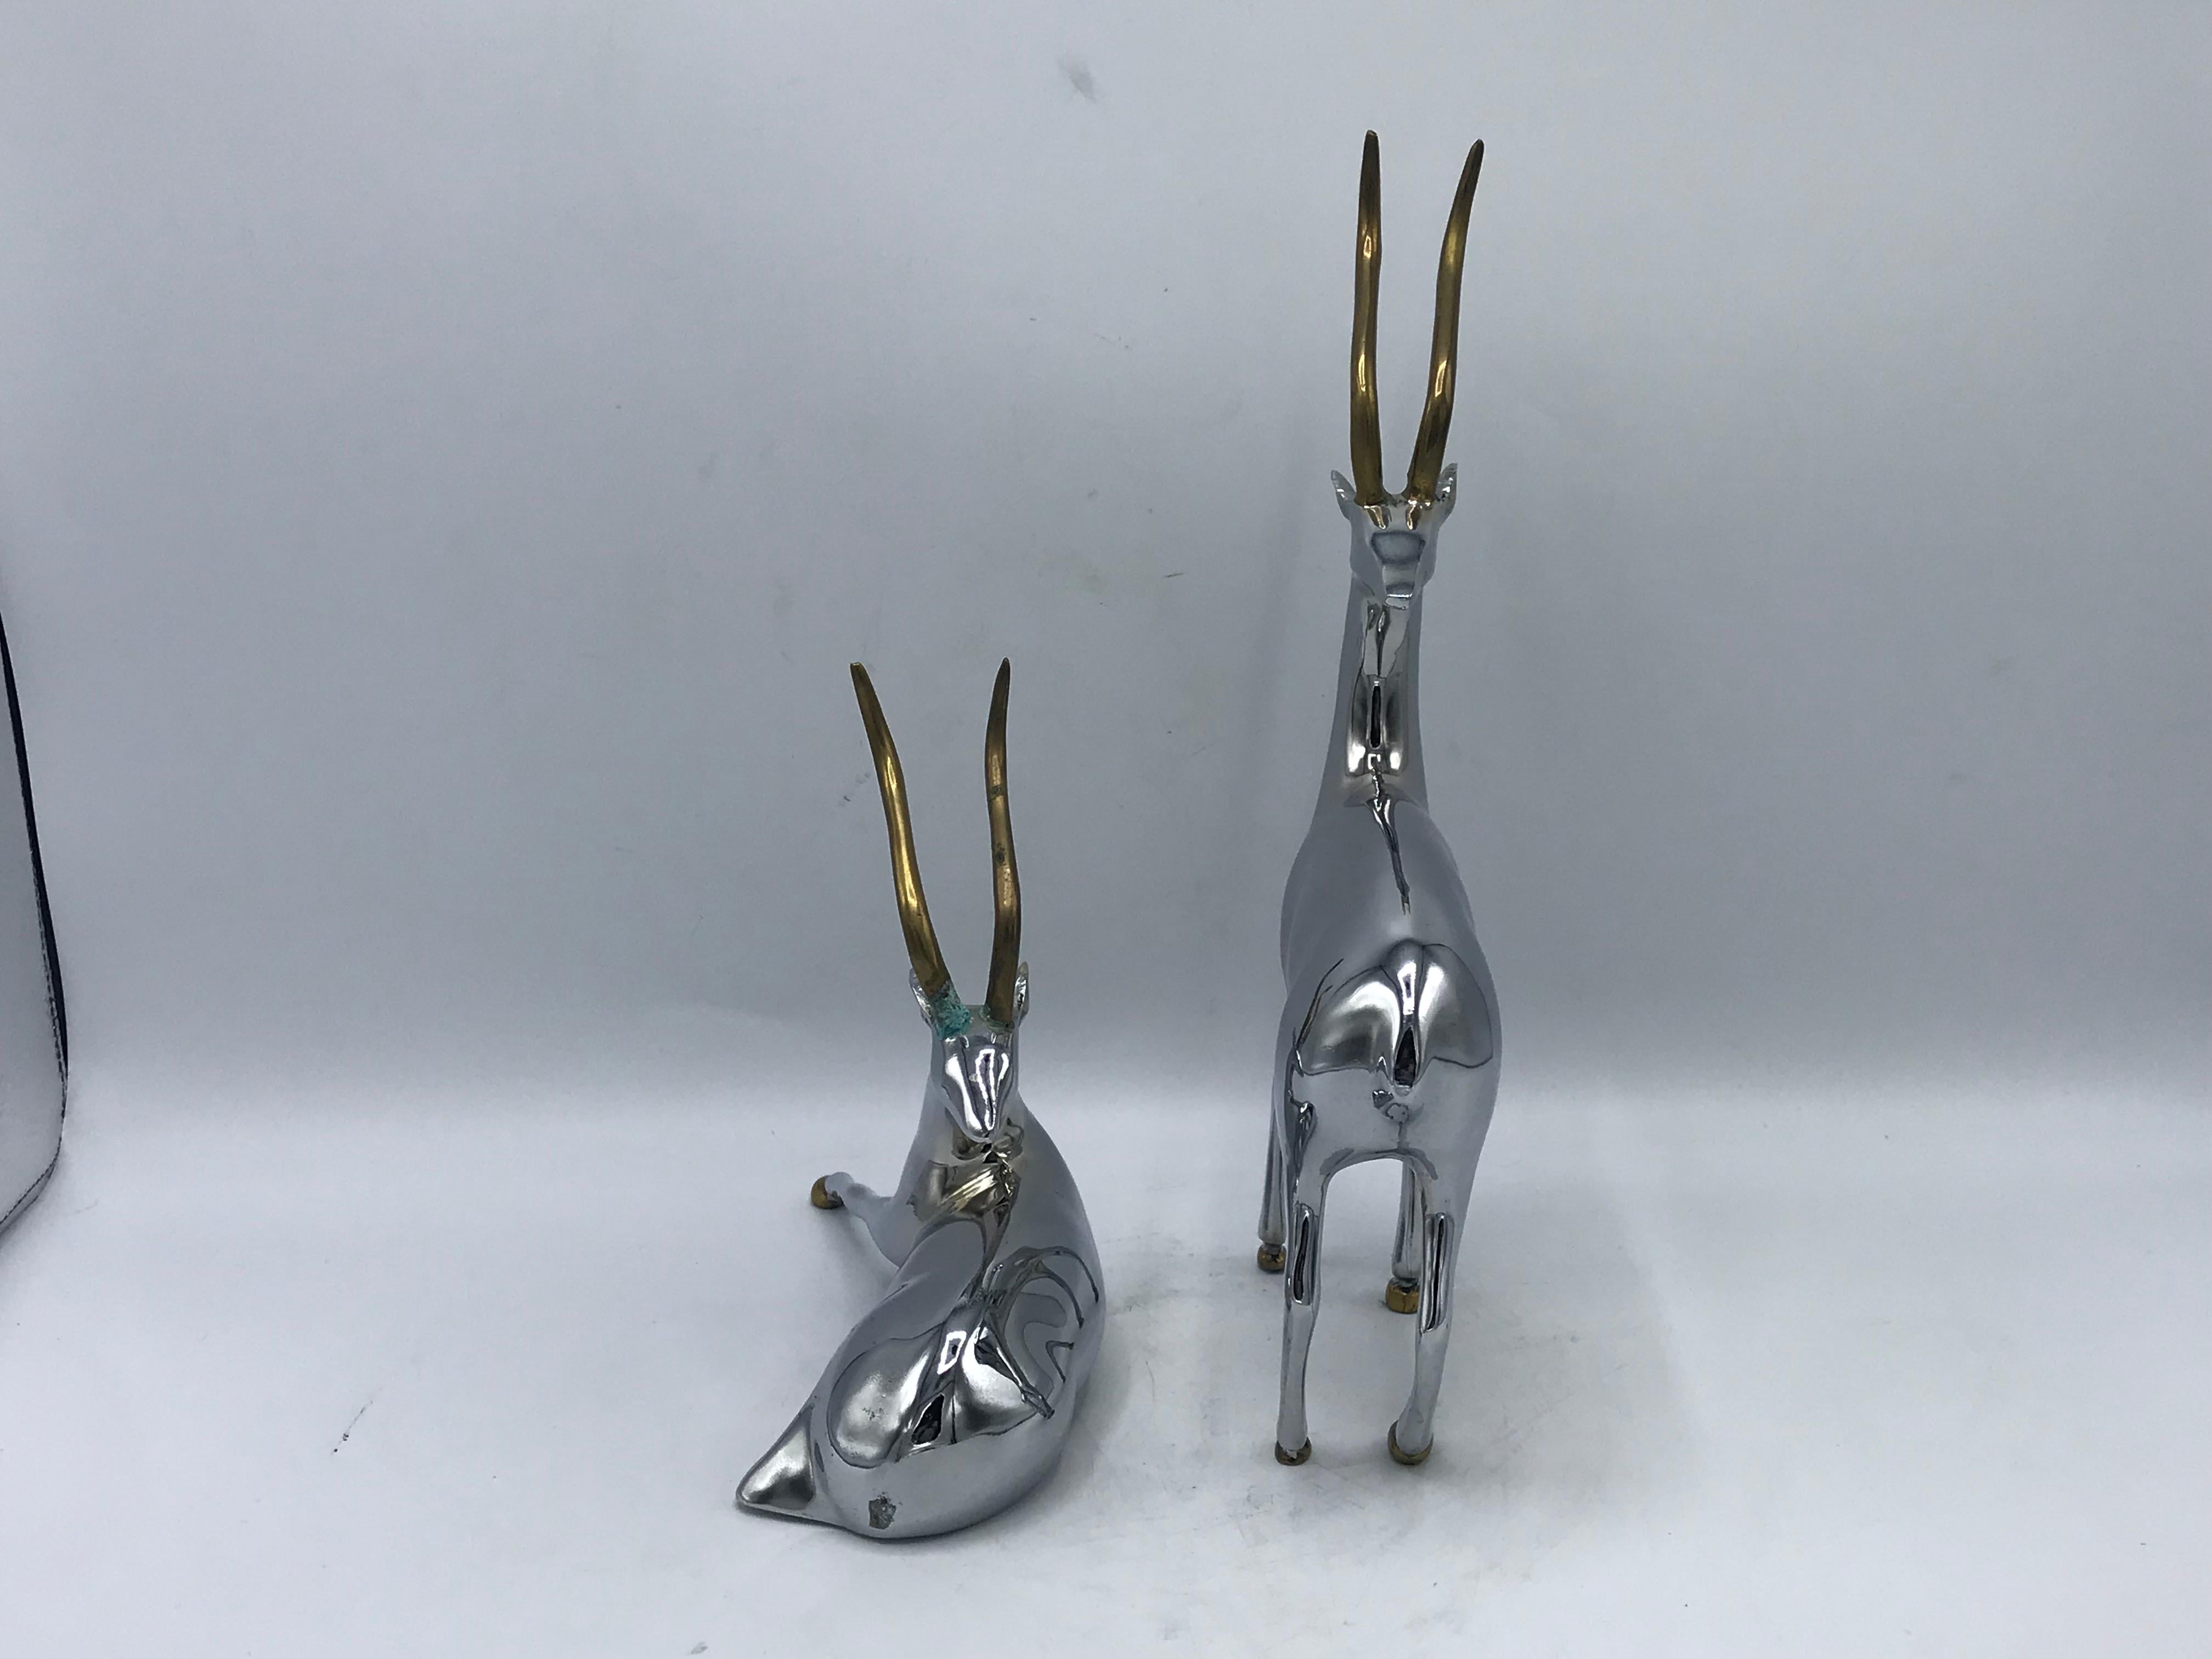 Polished 1960s Chrome and Brass Gazelle Sculptures, Pair For Sale